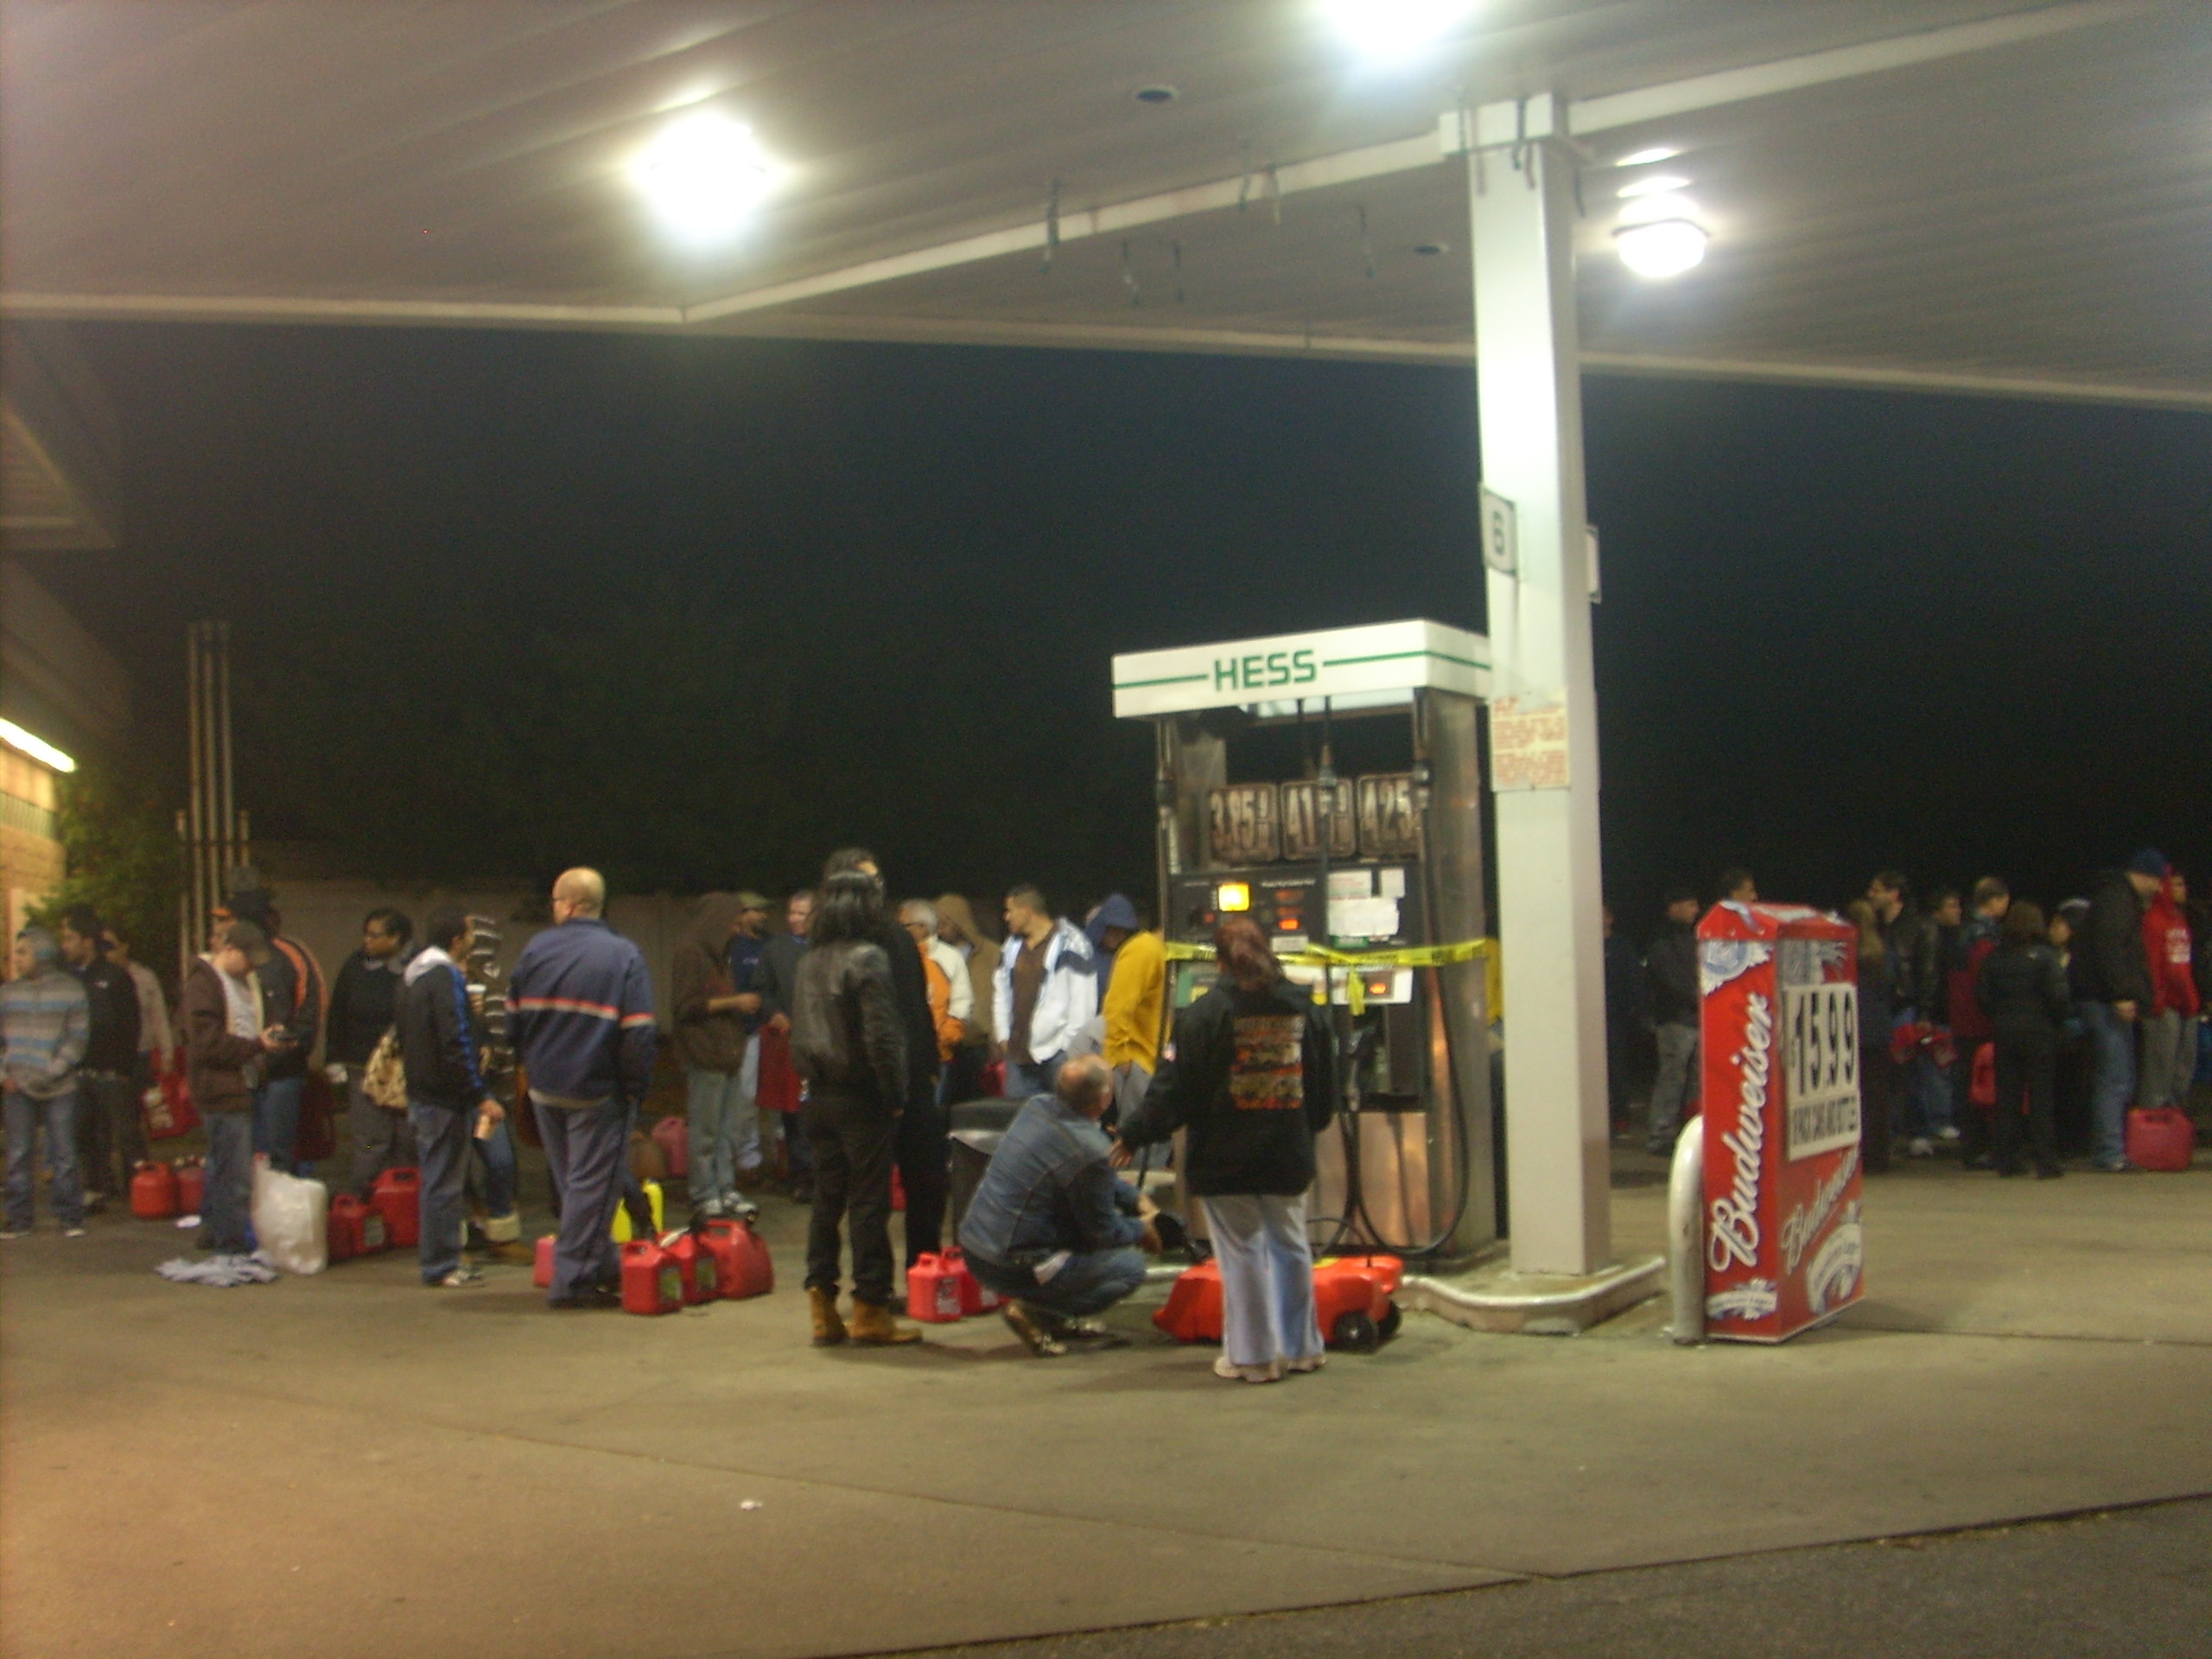 People stood in long lines at a Hess gasoline station on Old Country Road in Hicksville late Thursday, Nov. 1 filling gas cans and containers for vehicles and generators. Much of Long Island remained without power nearly a week after Hurricane Sandy wreaked havoc across the Northeast. (Christopher Twarowski/Long Island Press)